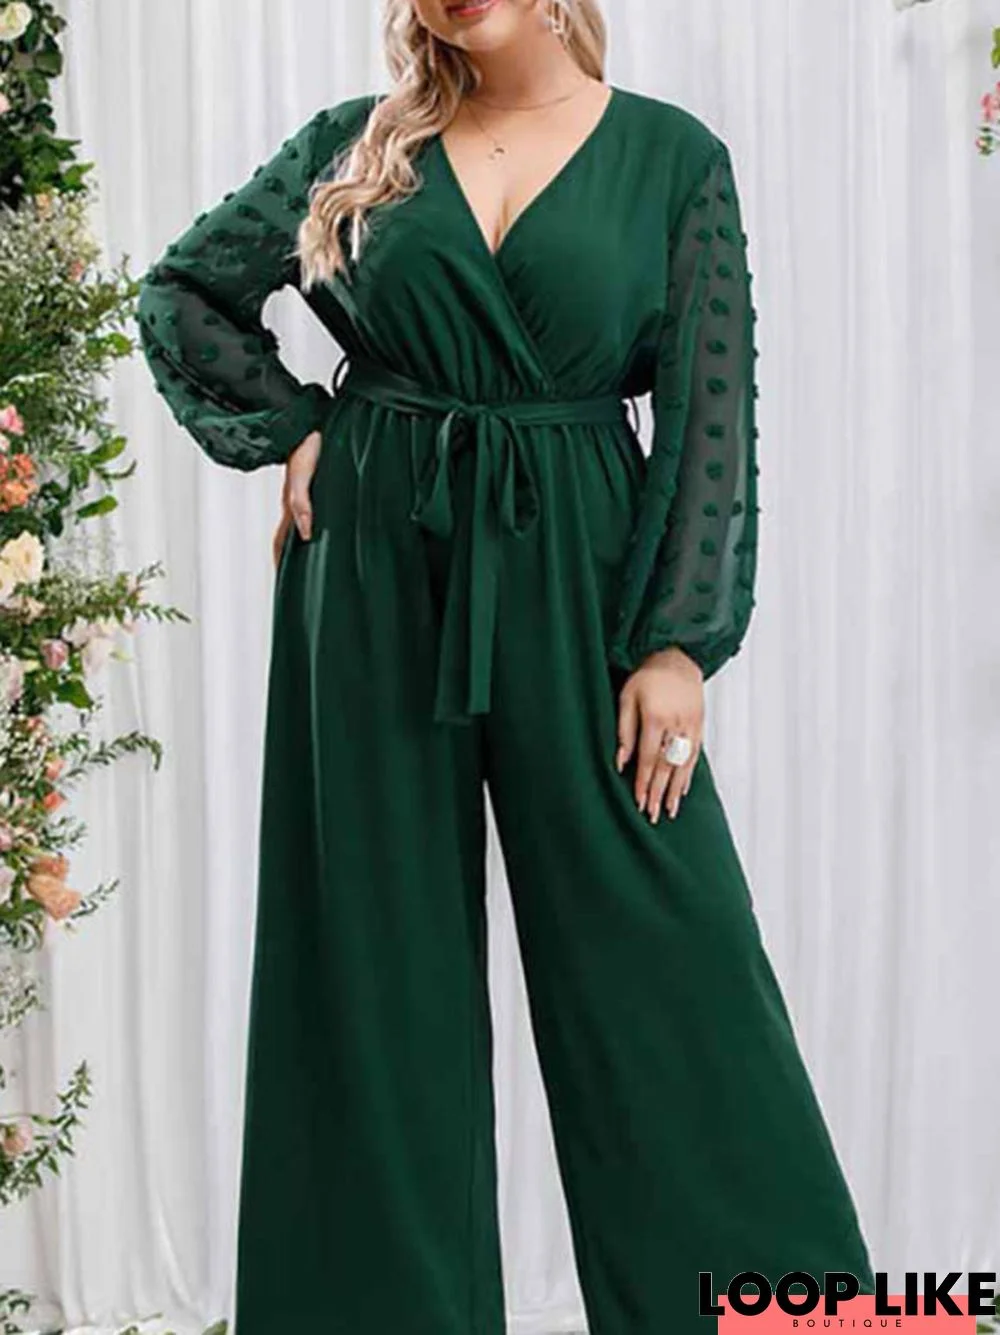 New Plus Size Women's Sexy Bowknot Lady Lace Straight Loose High Waist Solid Color Jumpsuit